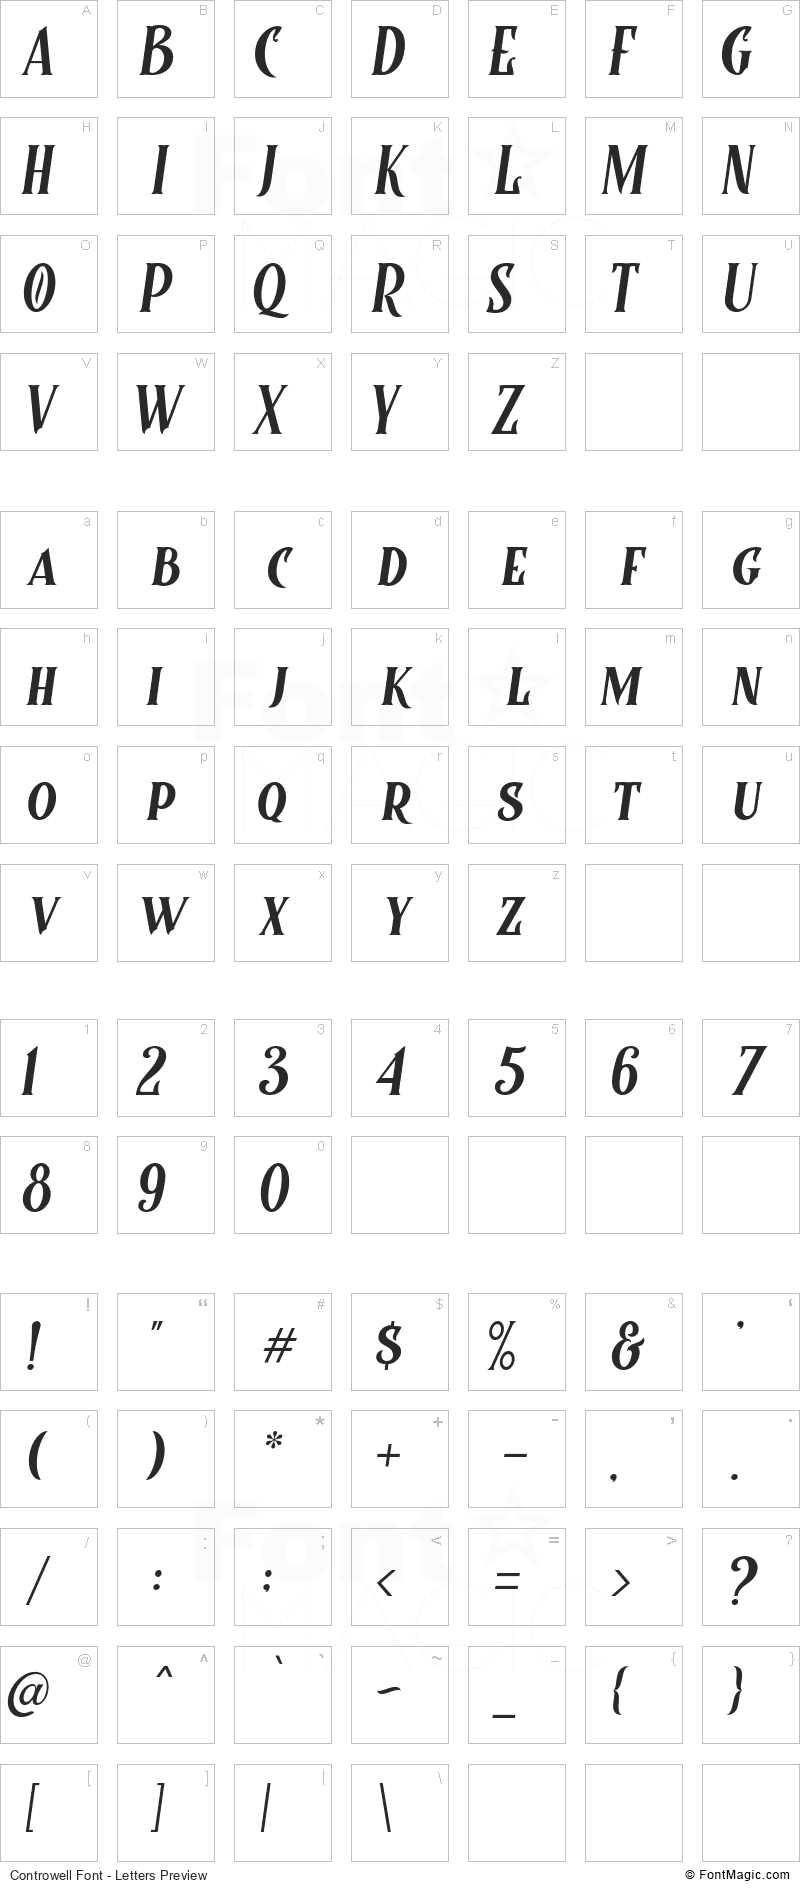 Controwell Font - All Latters Preview Chart